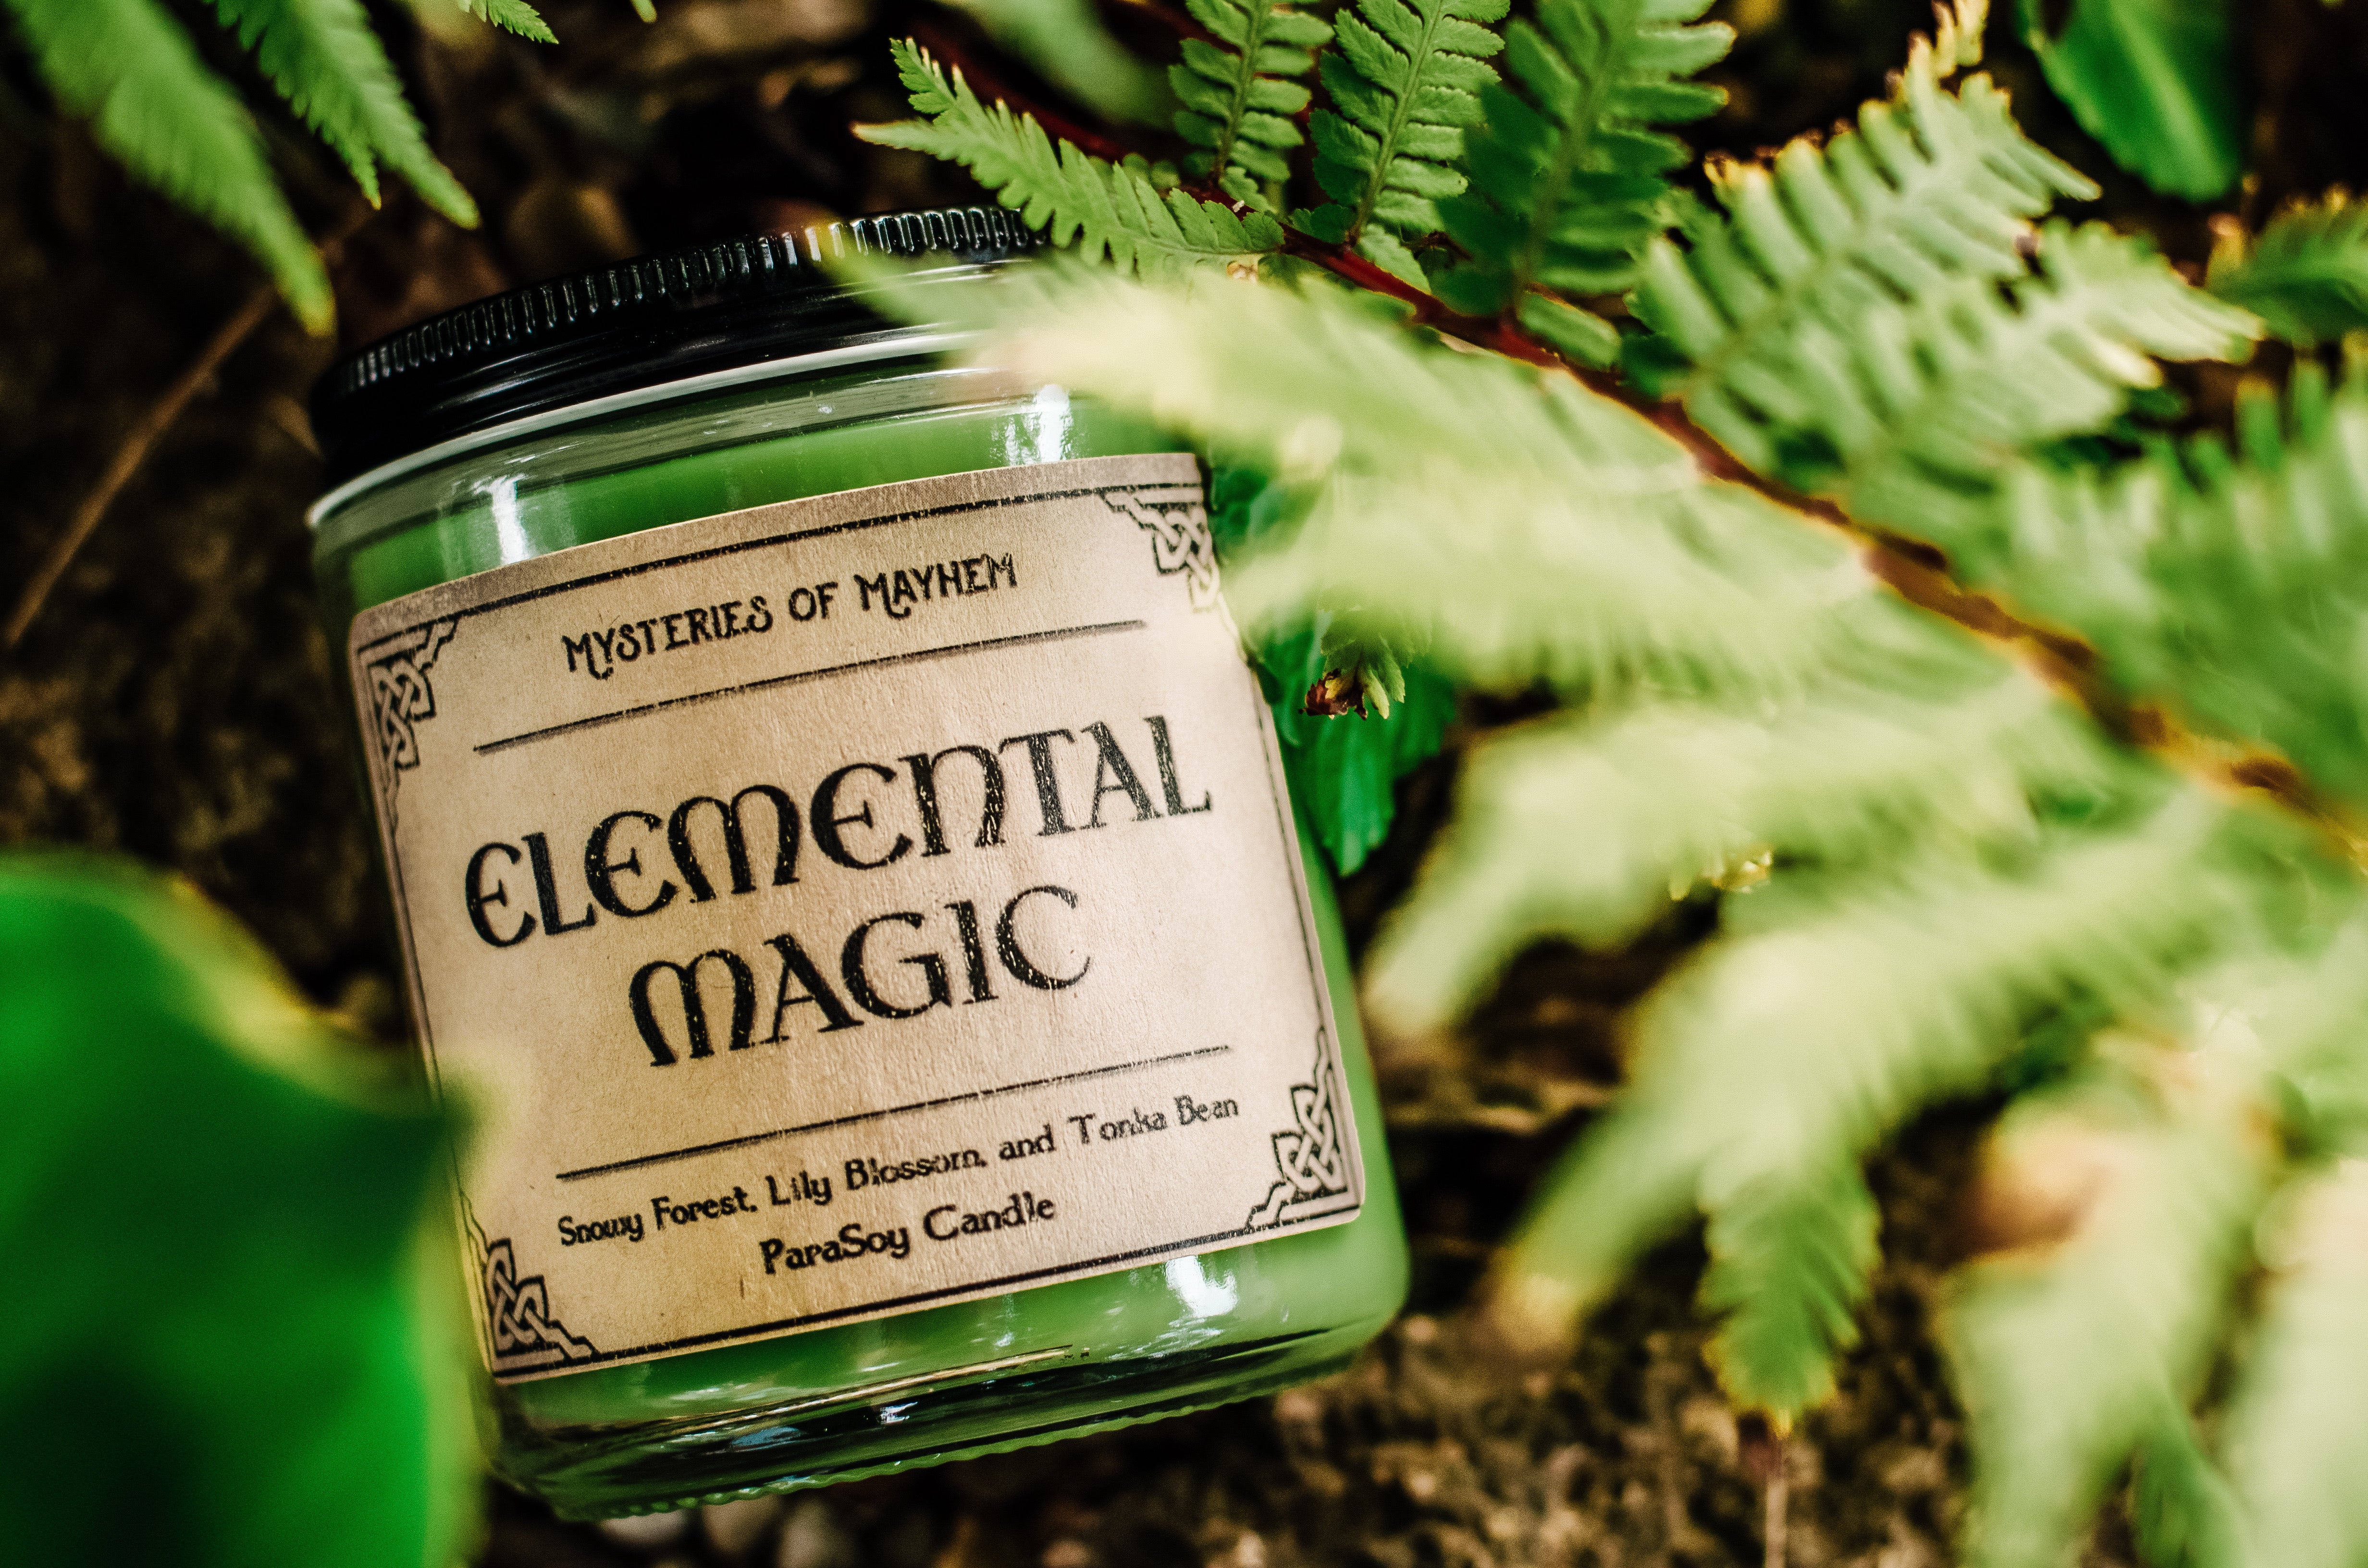 Elemental Magic - Snowy Forest, Lily Blossom, and Tonka Bean Scented